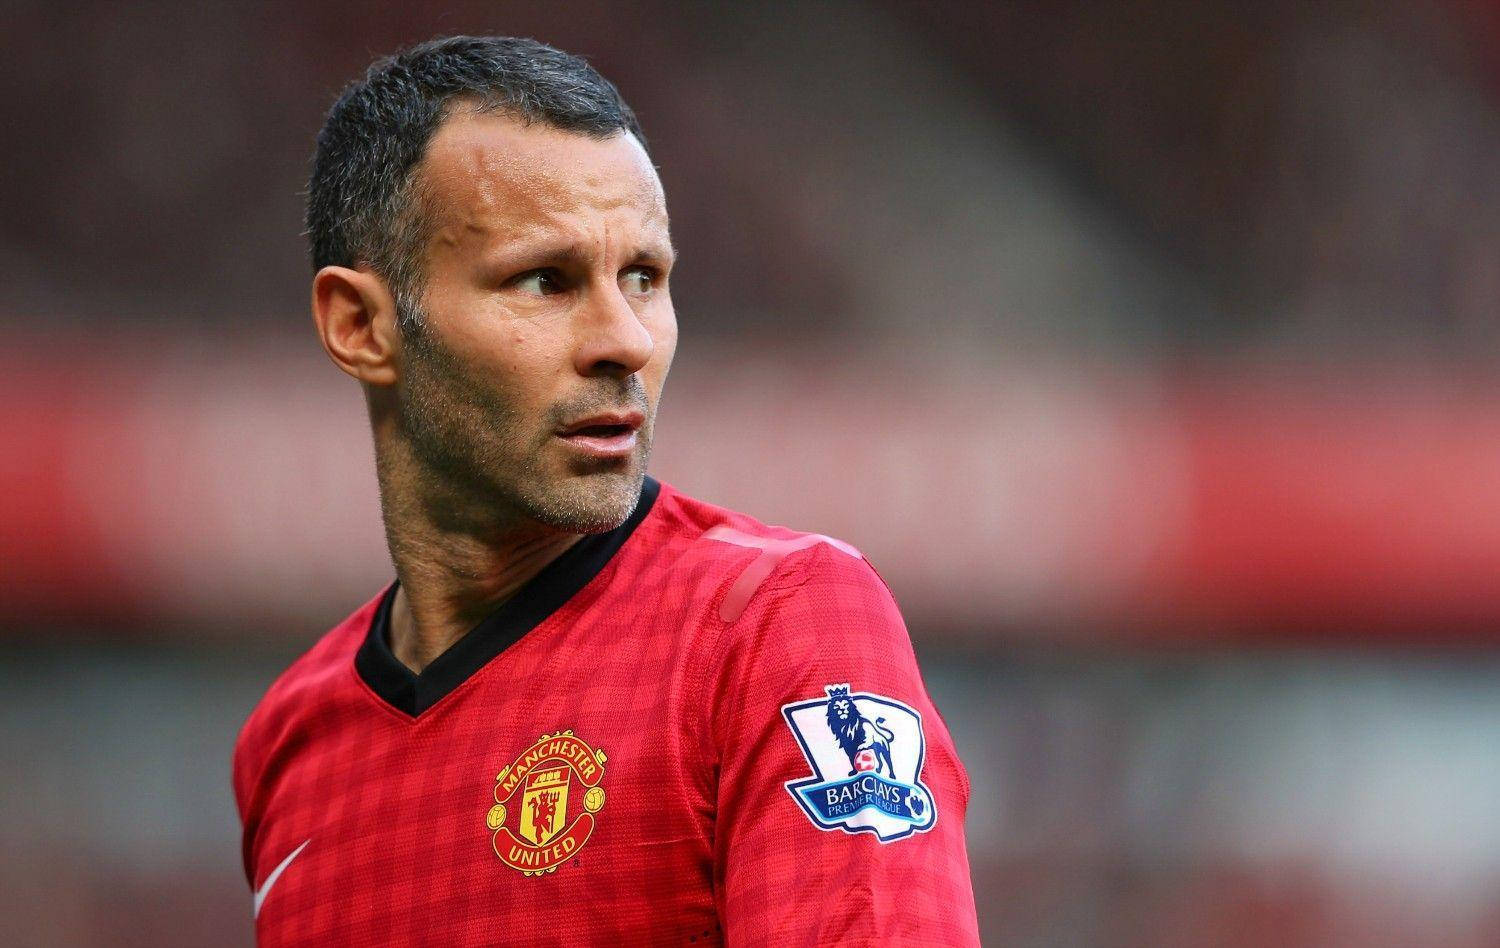 Ryan Giggs Famous Football Player Background